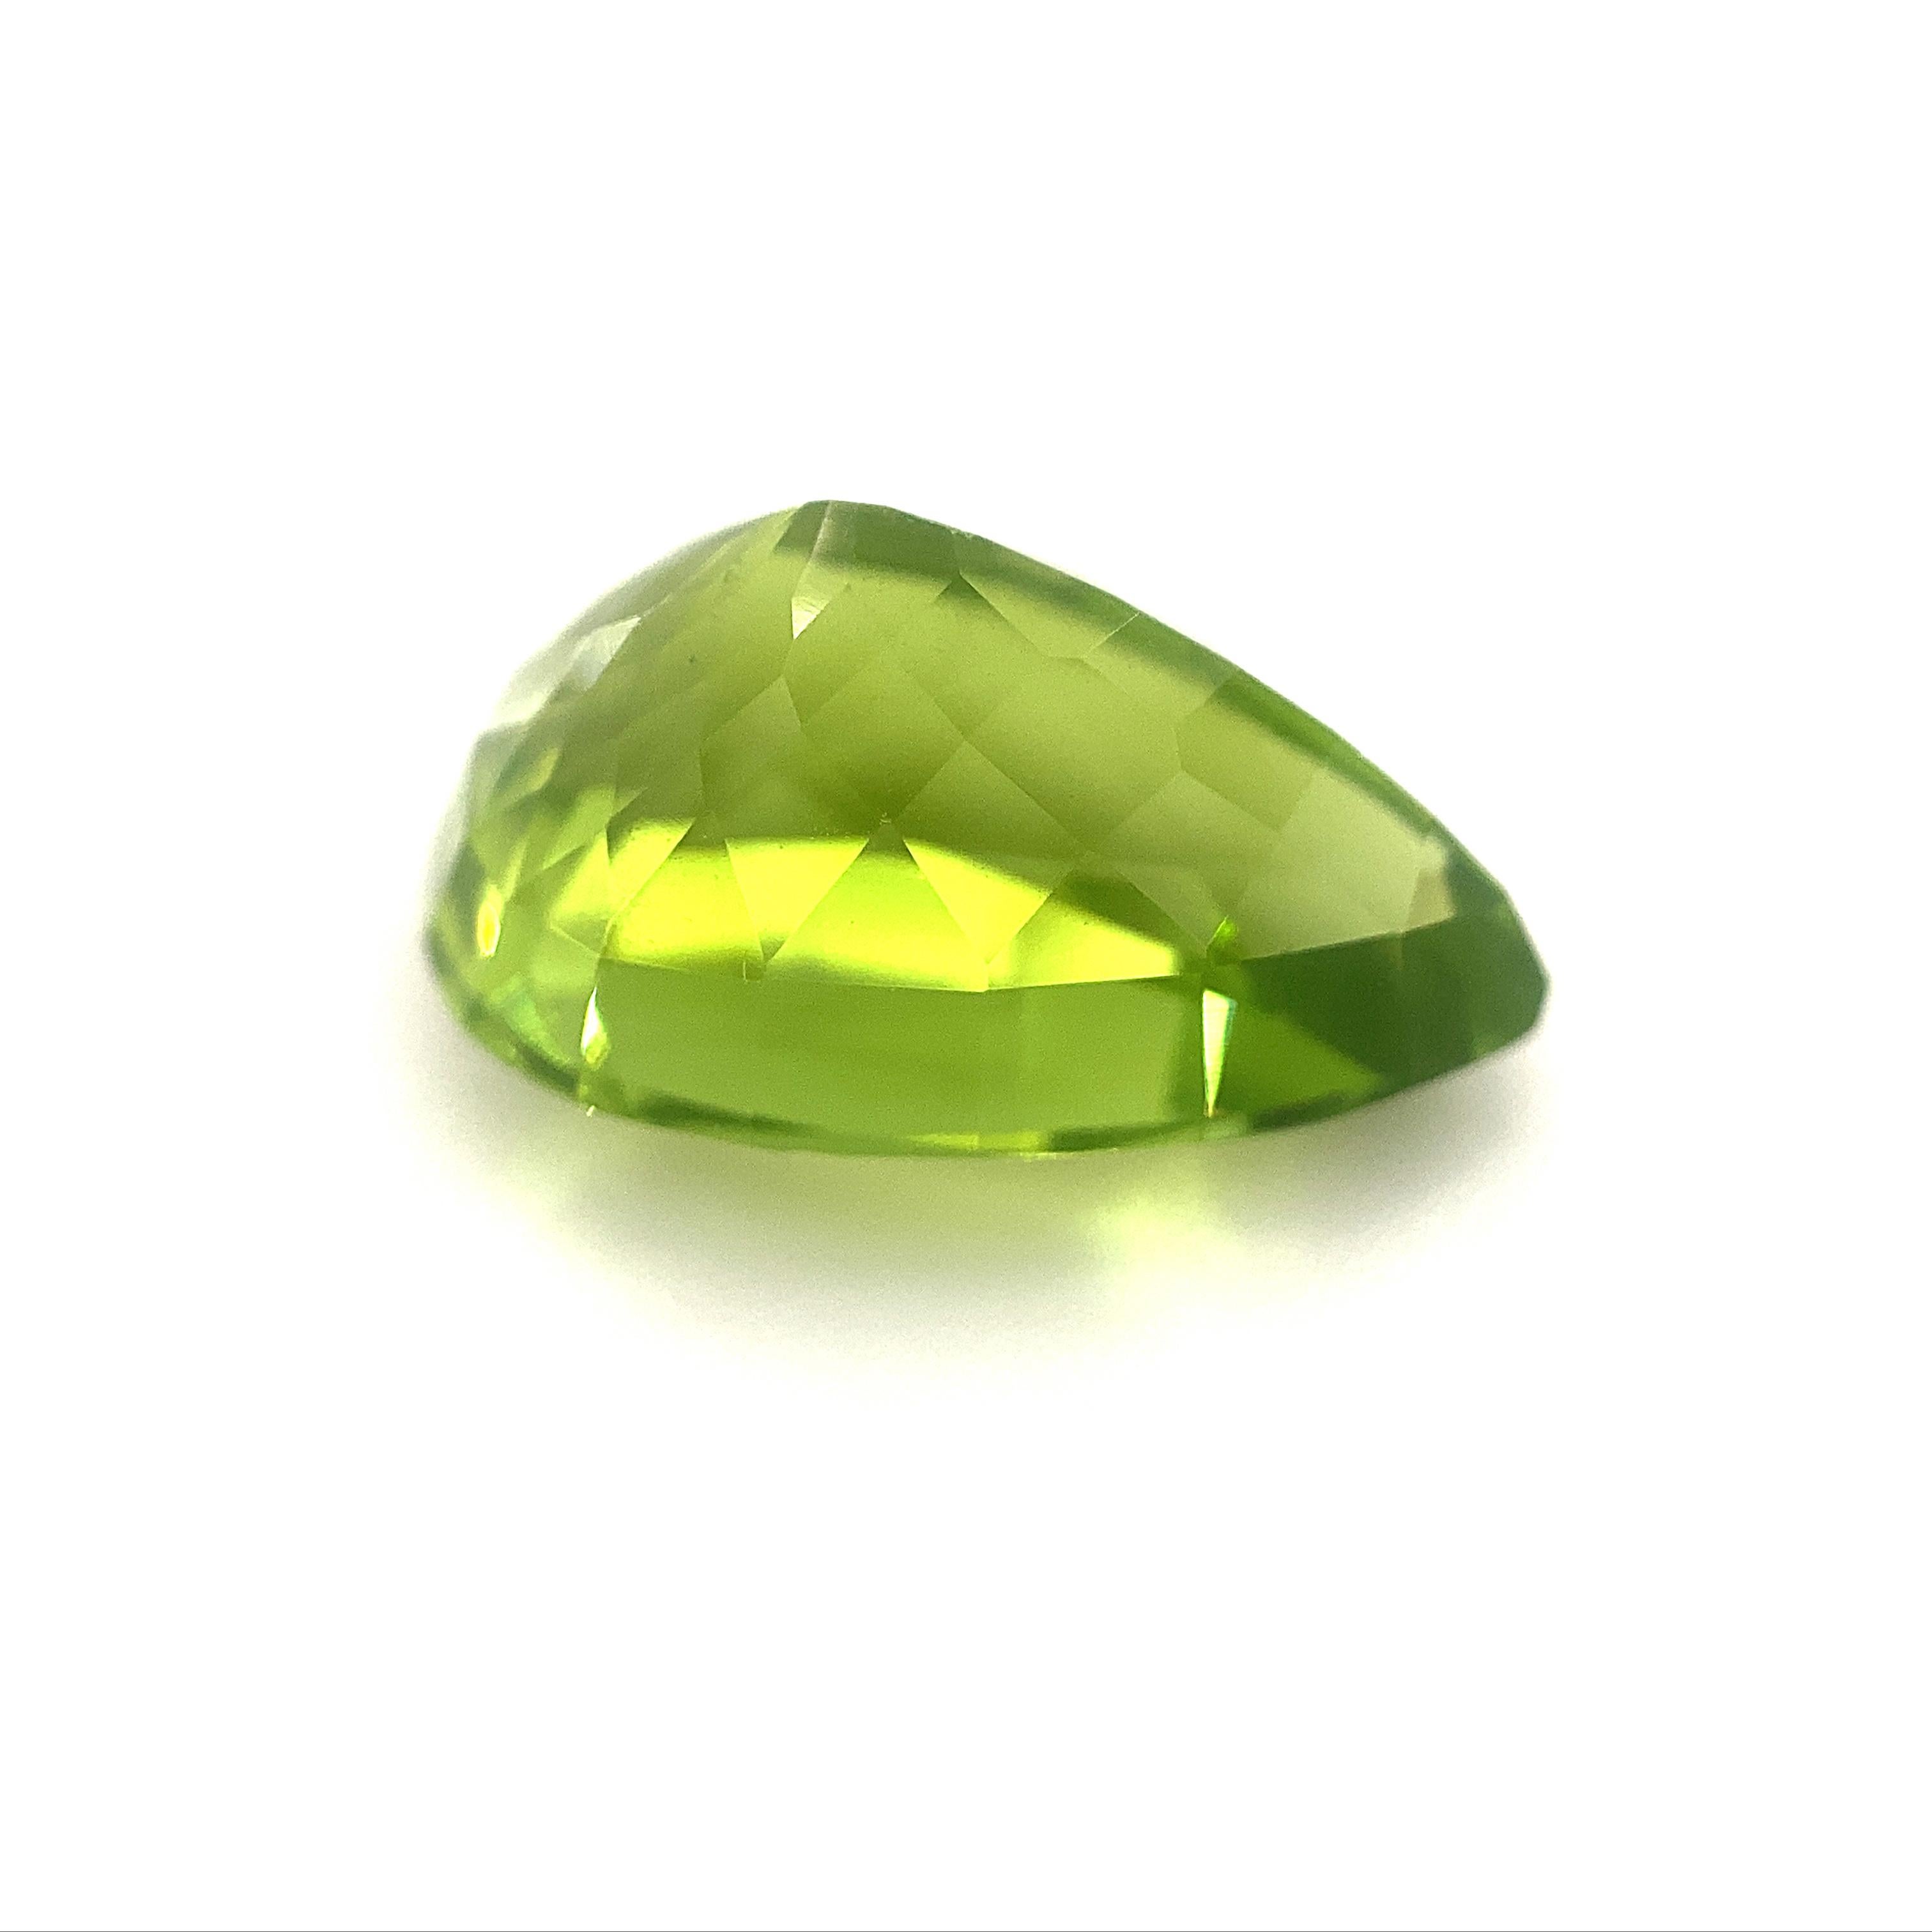 Brilliant Cut 10.17ct Pear Peridot GIA Certified For Sale